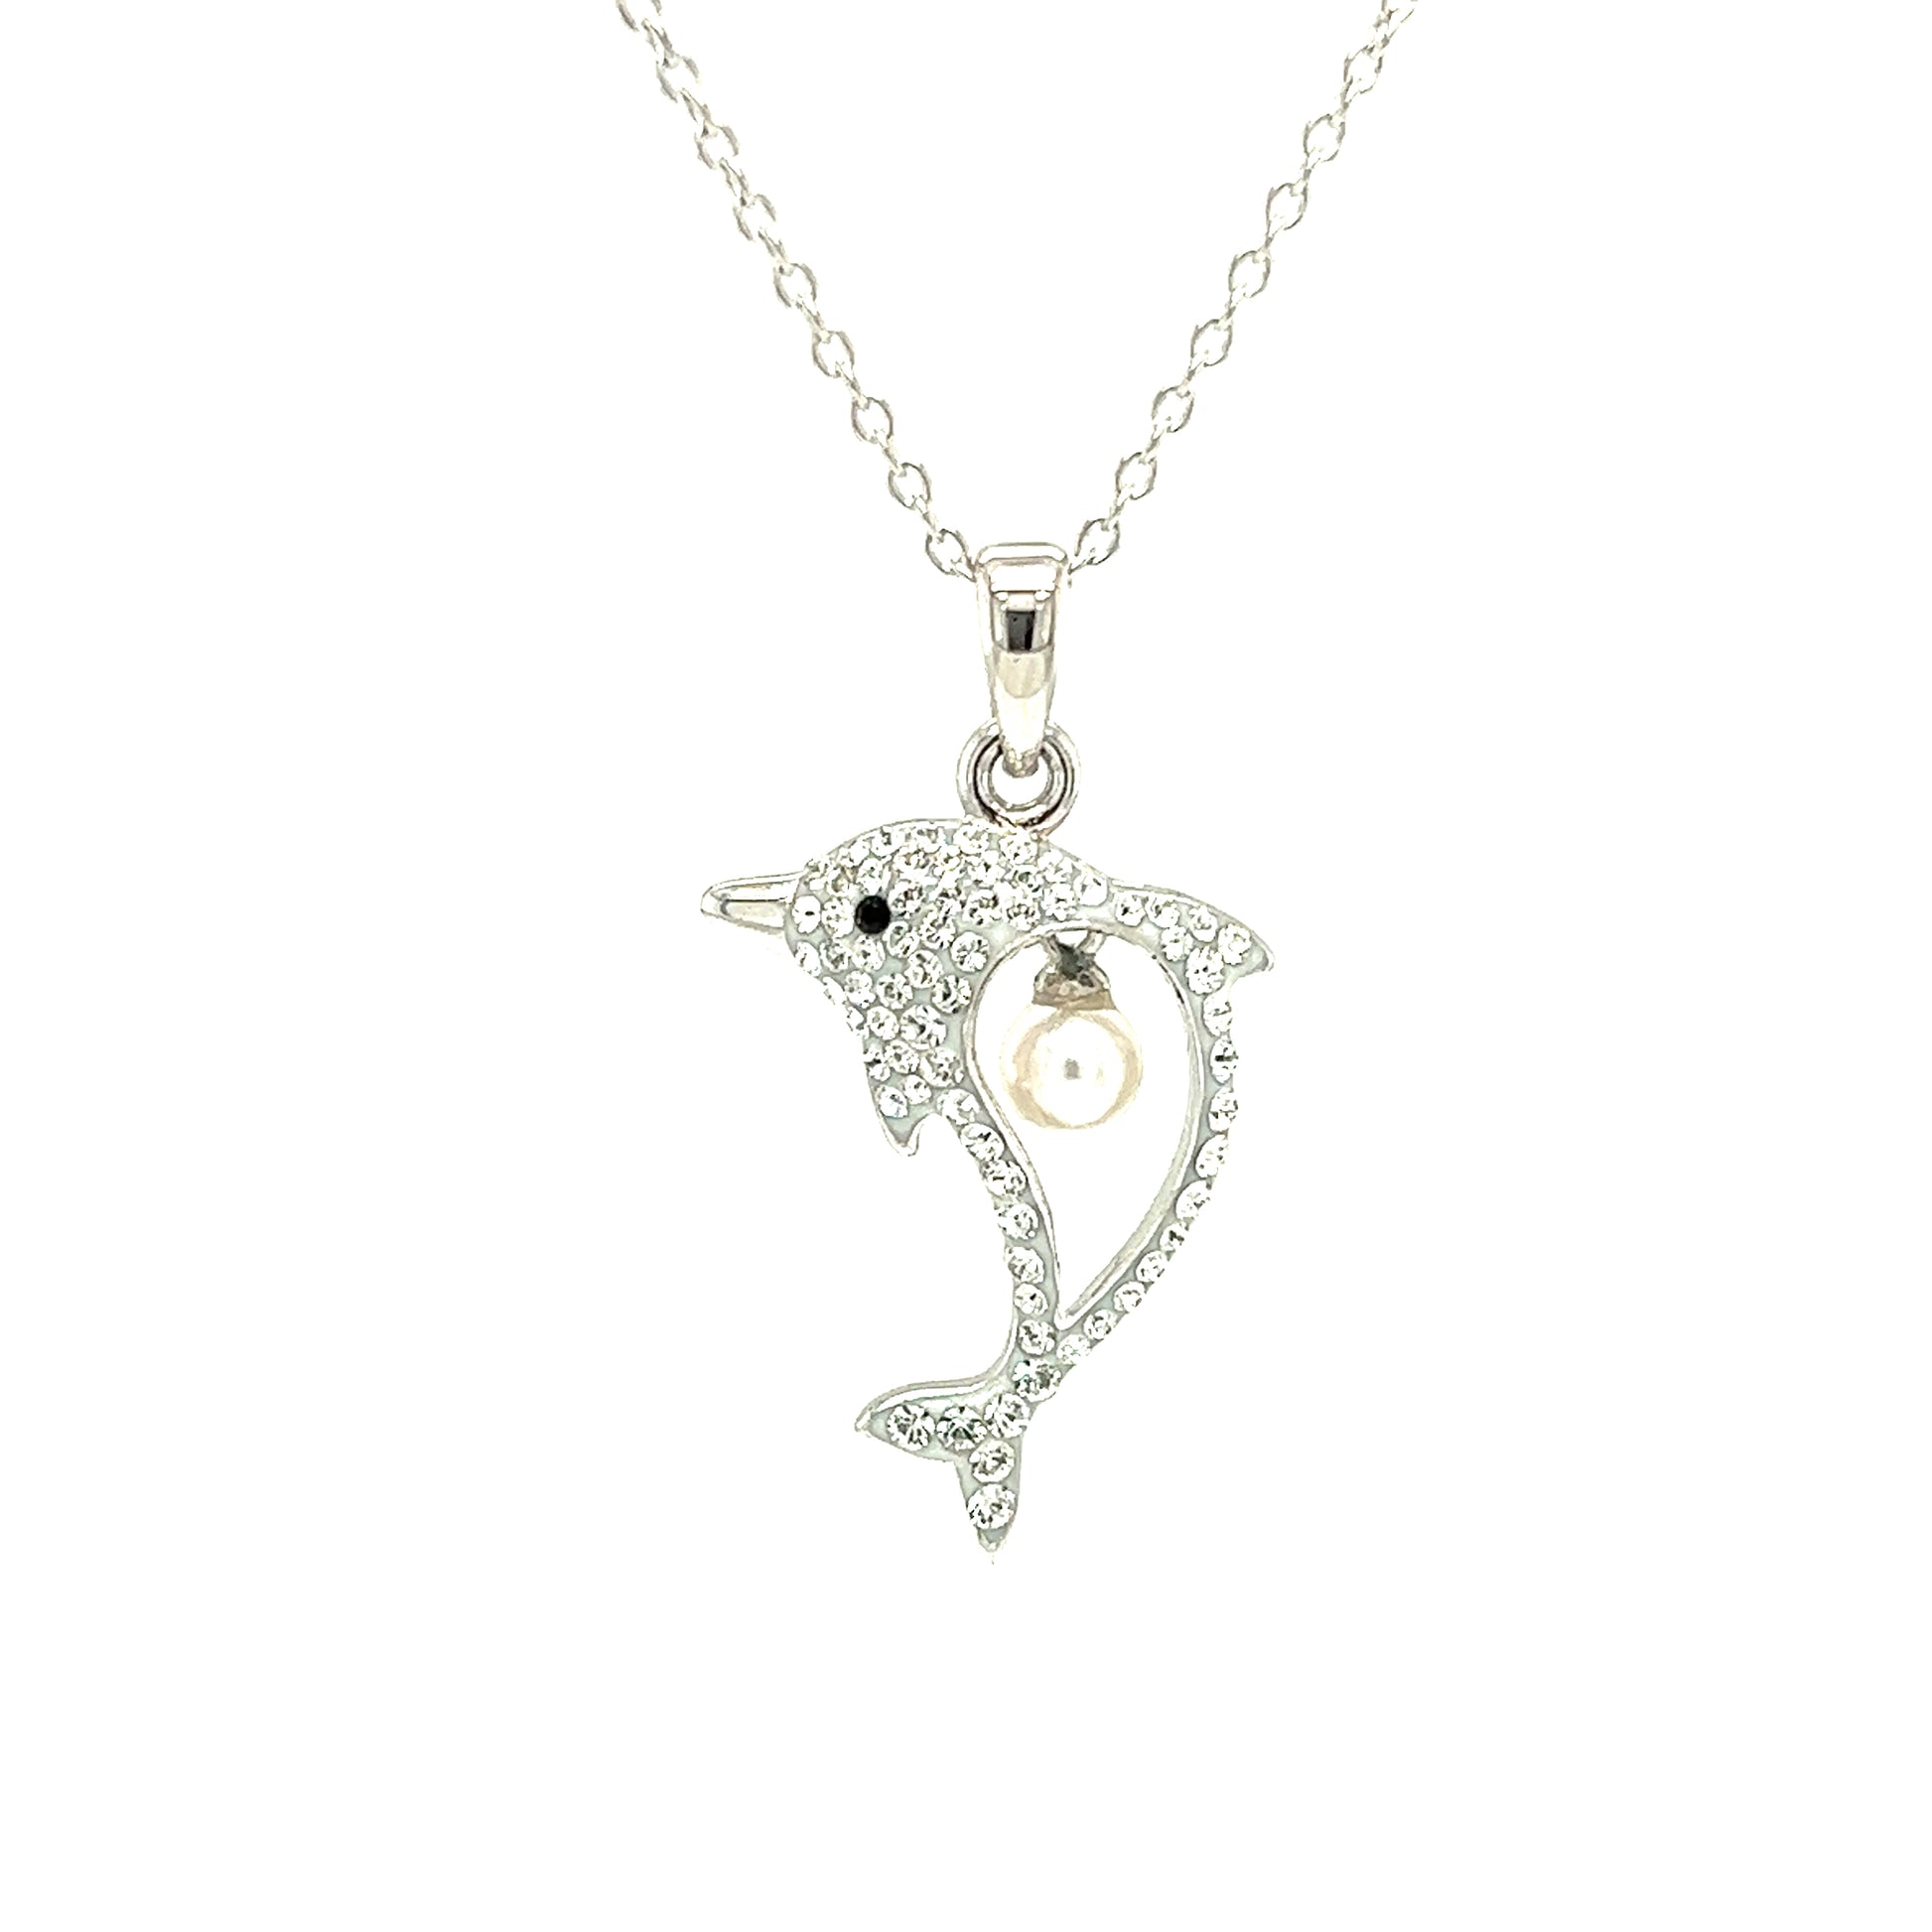 Dolphin Necklace With 4mm White Pearl and White Crystals in Sterling Silver Pendant Front View